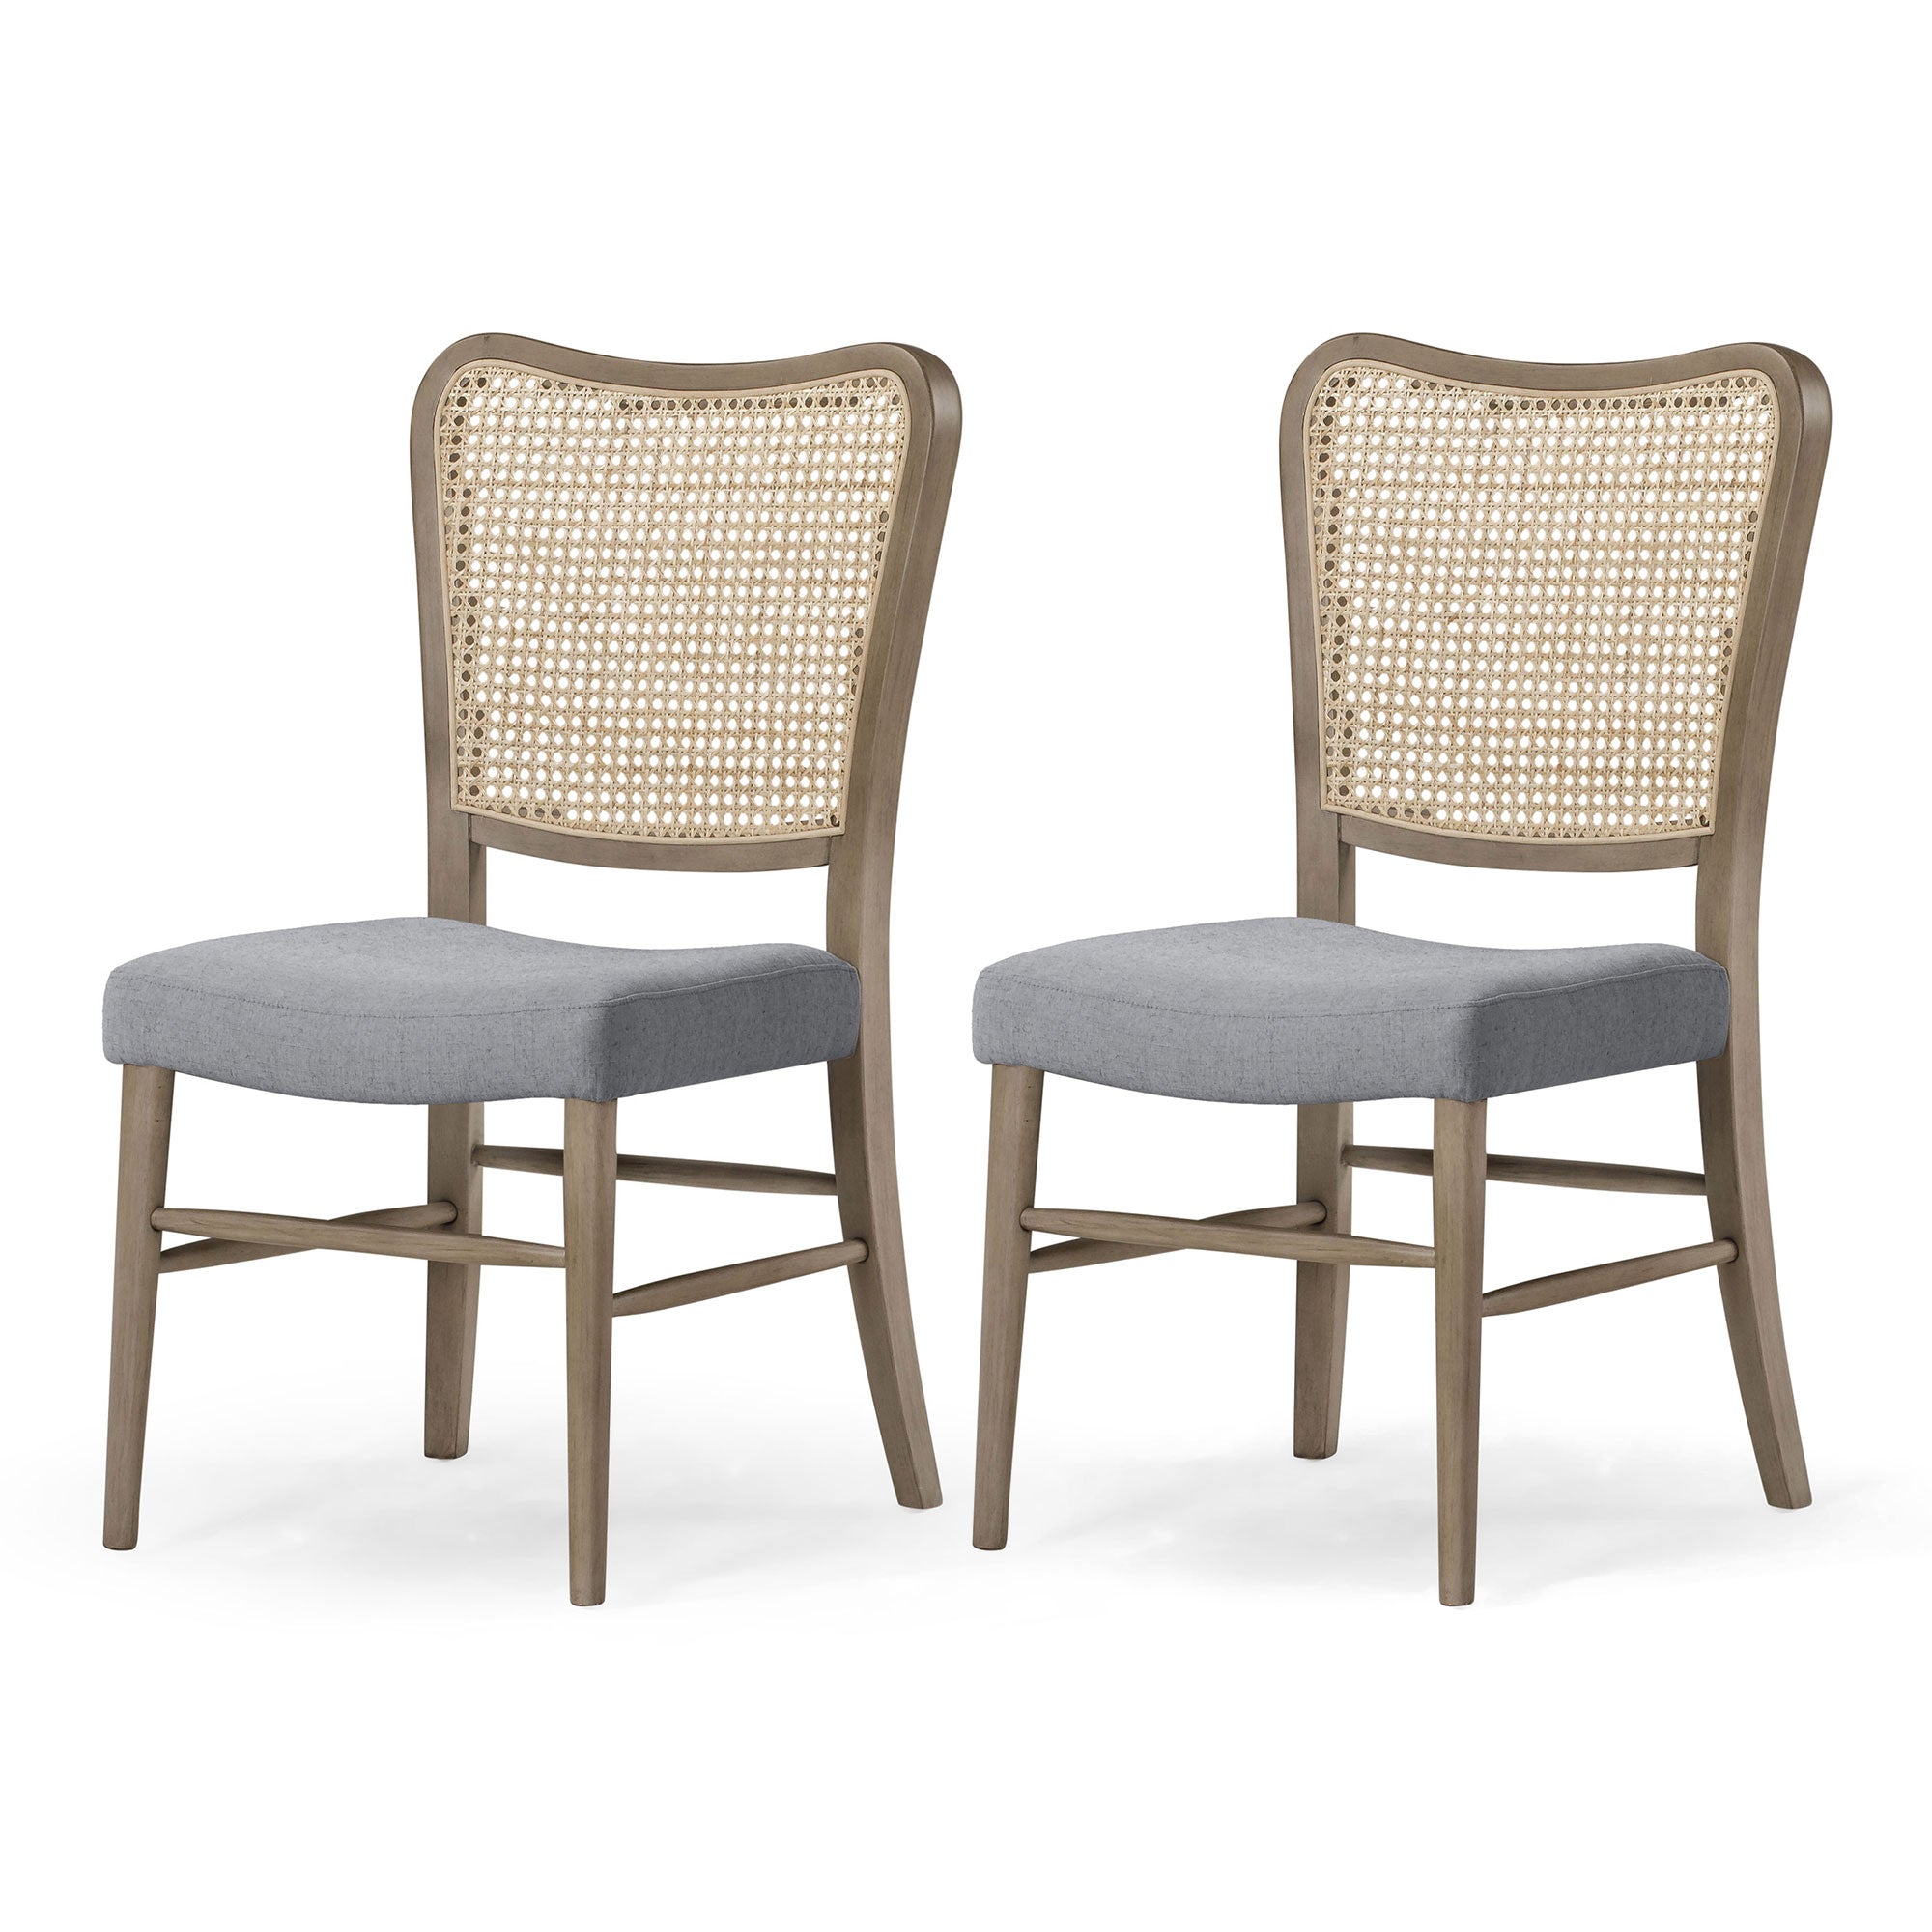 Vera Classical Wooden Dining Chair in Antiqued Grey Finish with Slate Linen Fabric Upholstery, Set of 2 in Dining Furniture by Maven Lane